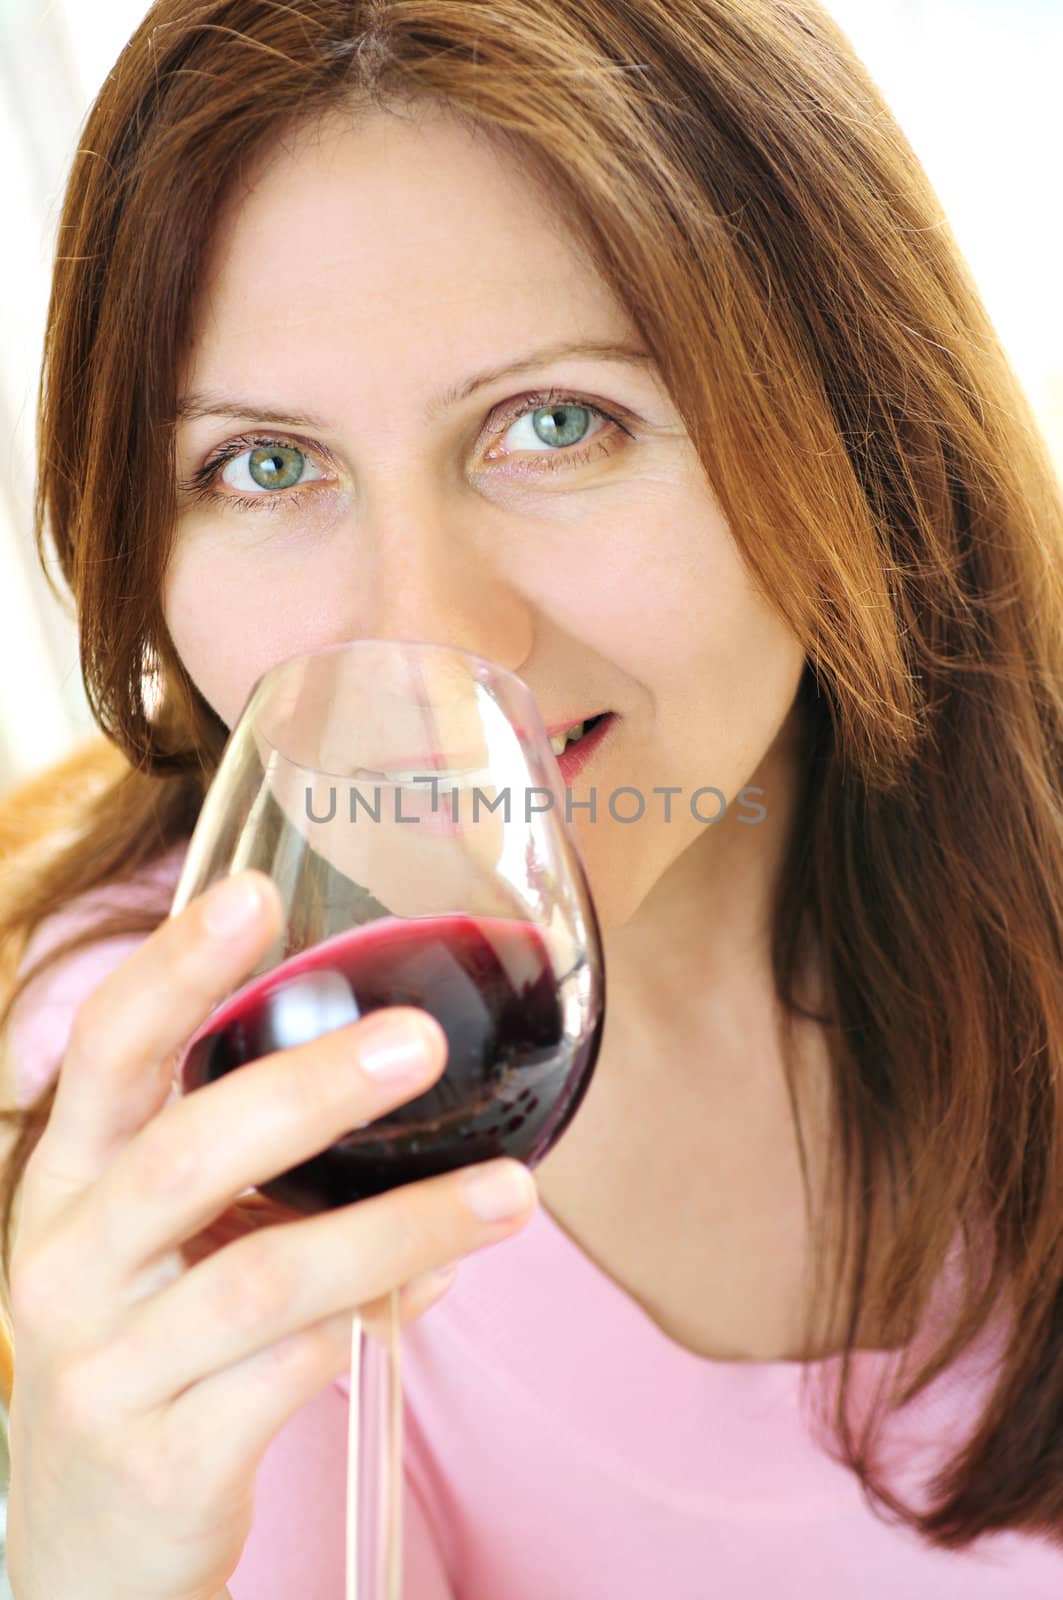 Smiling mature woman holding a glass of red wine